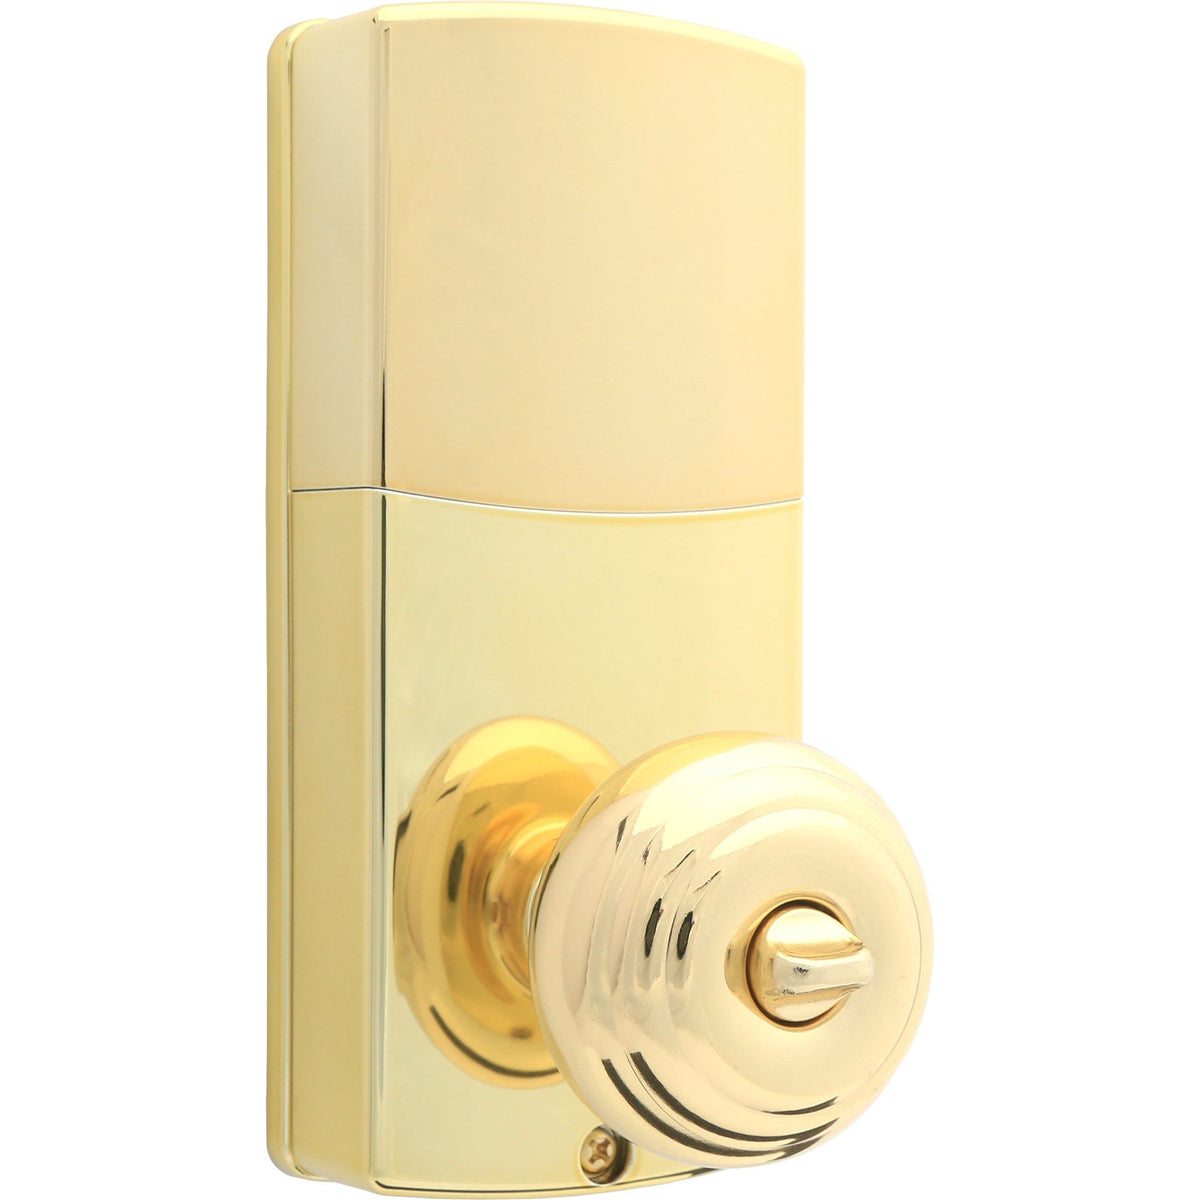 Honeywell 8732001 Electronic Entry Knob Door Lock with Keypad in Polished Brass